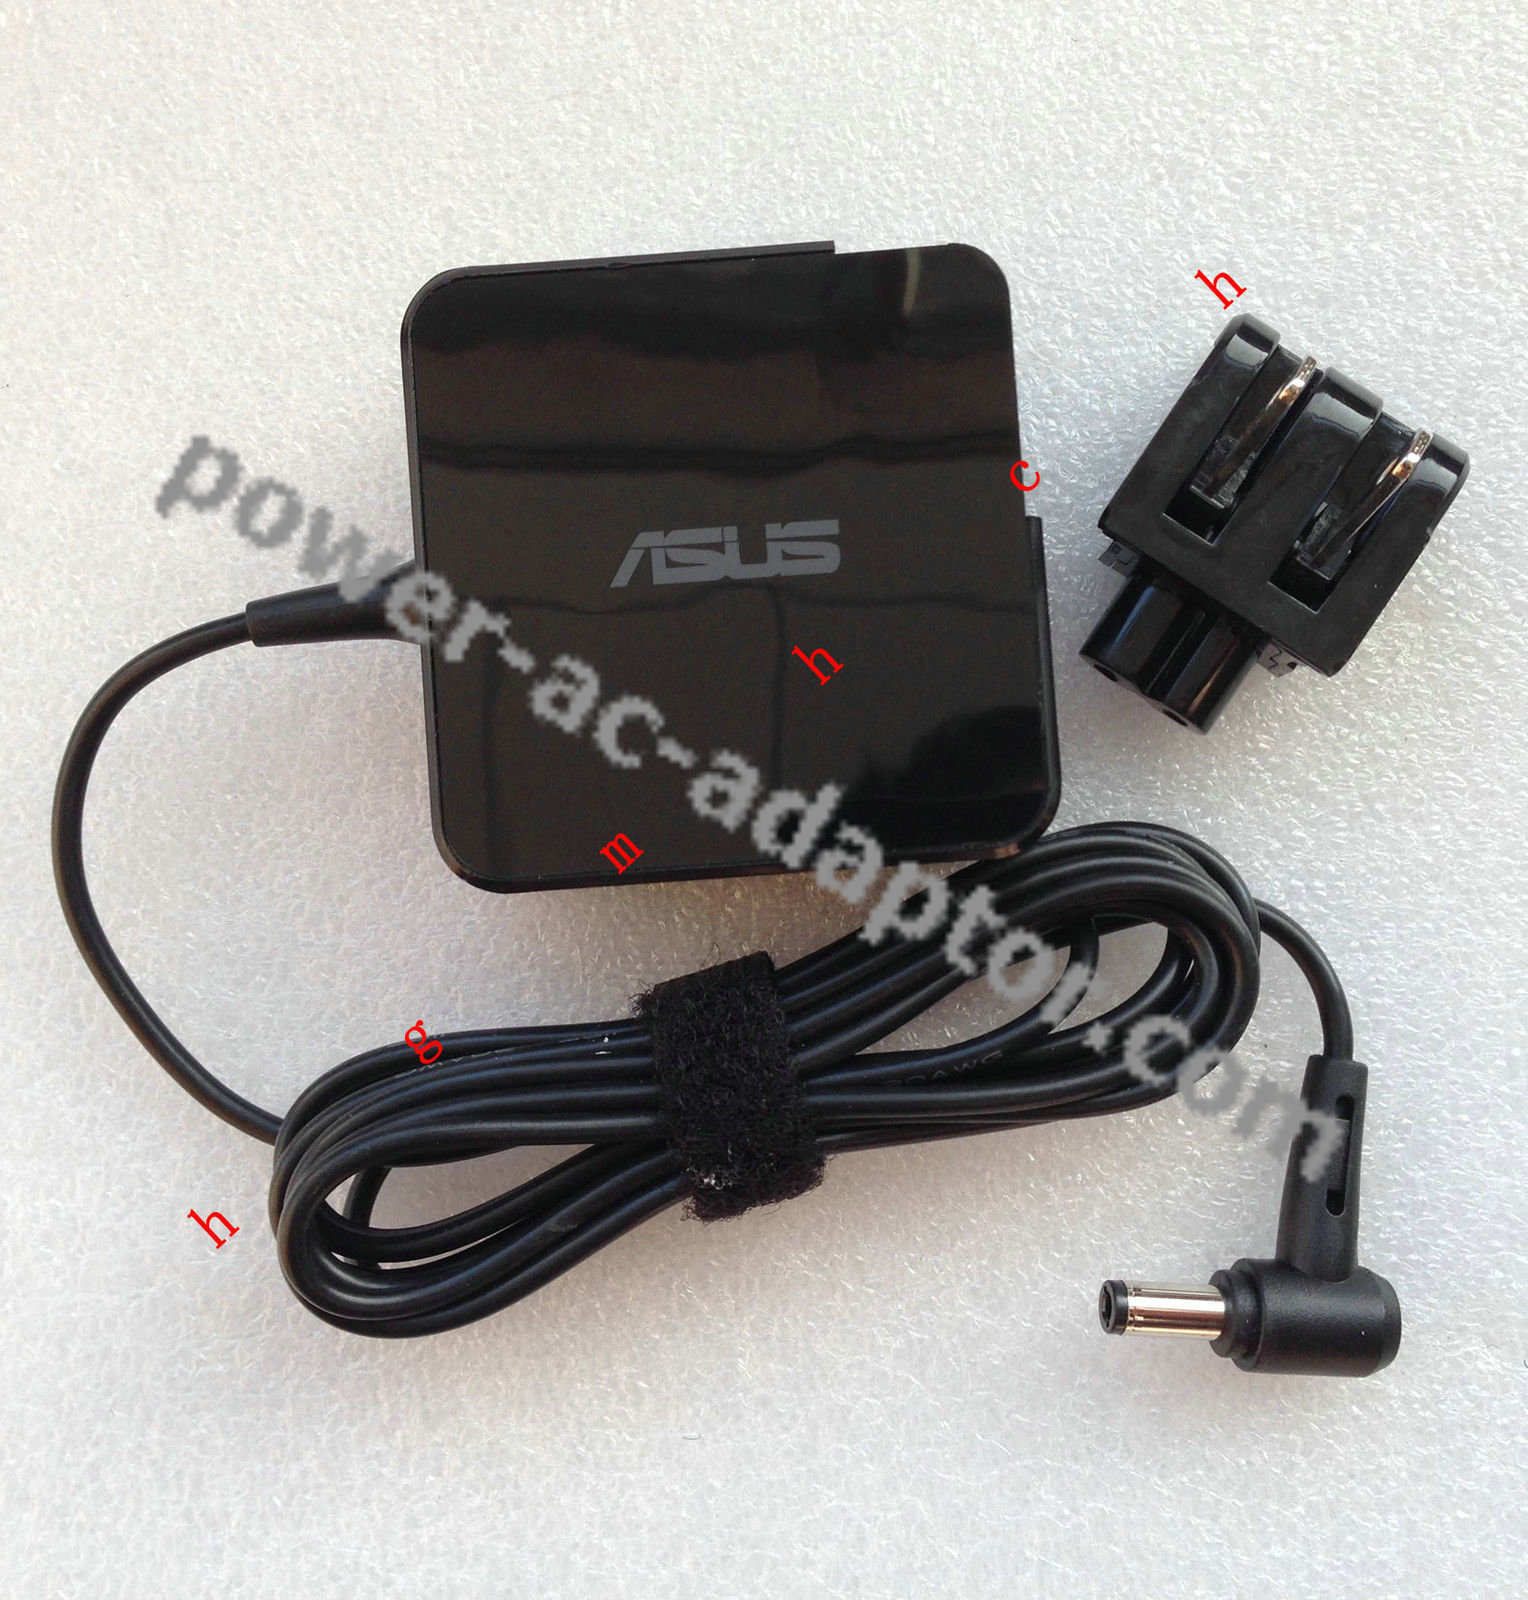 OEM 33W AC Power Adapter Cord for Asus X551MA-SX287D Notebook